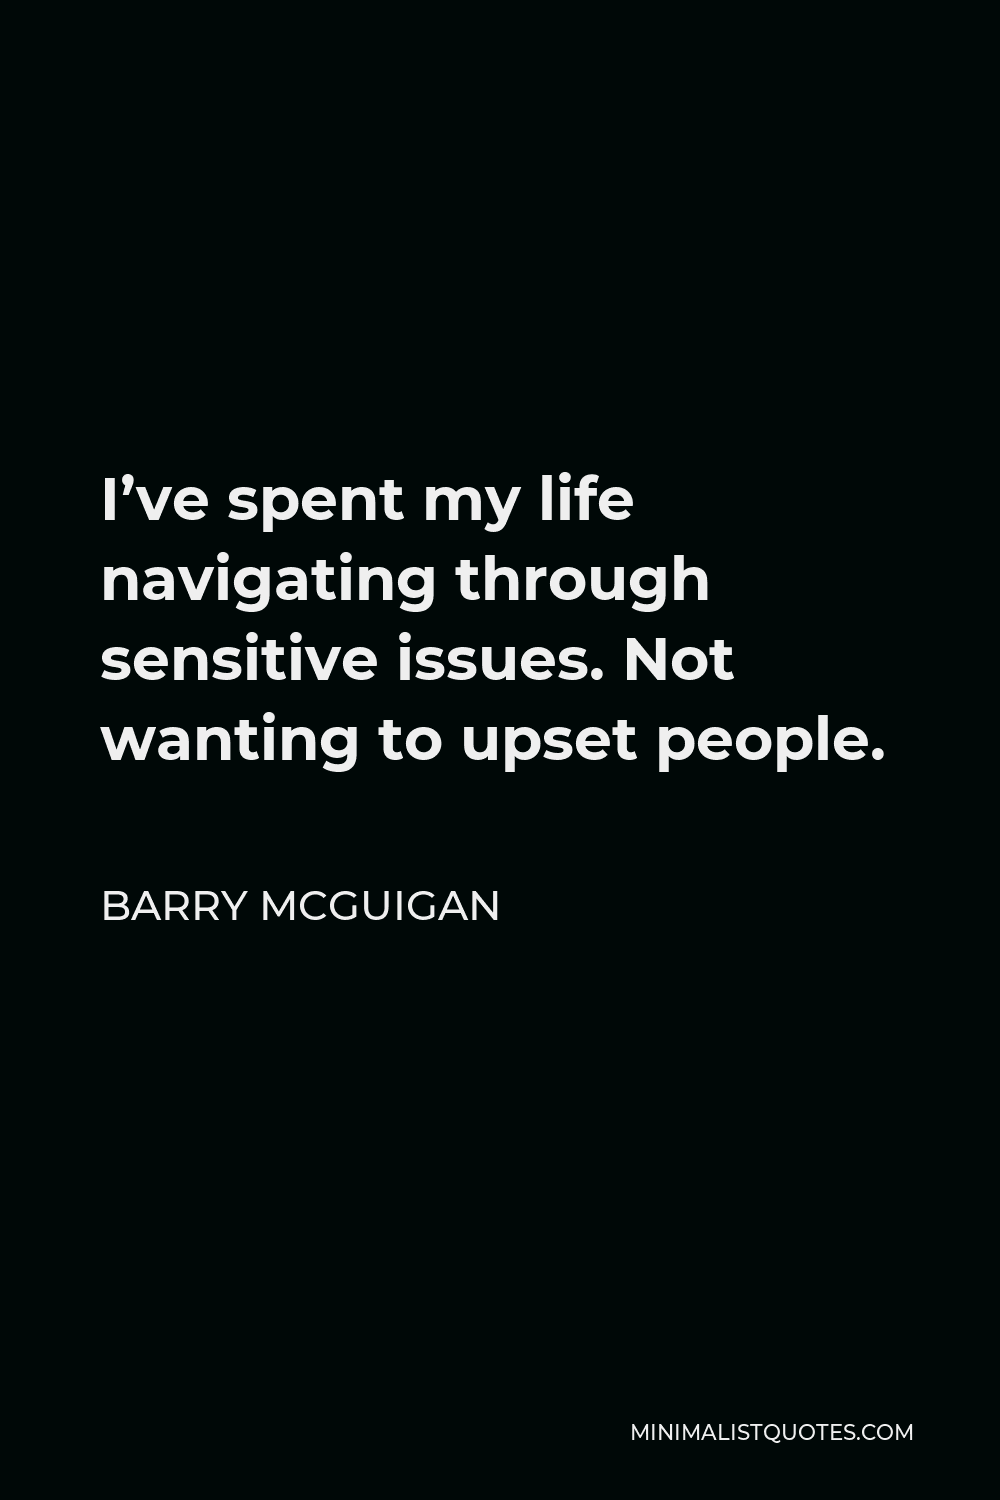 Barry McGuigan Quote - I’ve spent my life navigating through sensitive issues. Not wanting to upset people.